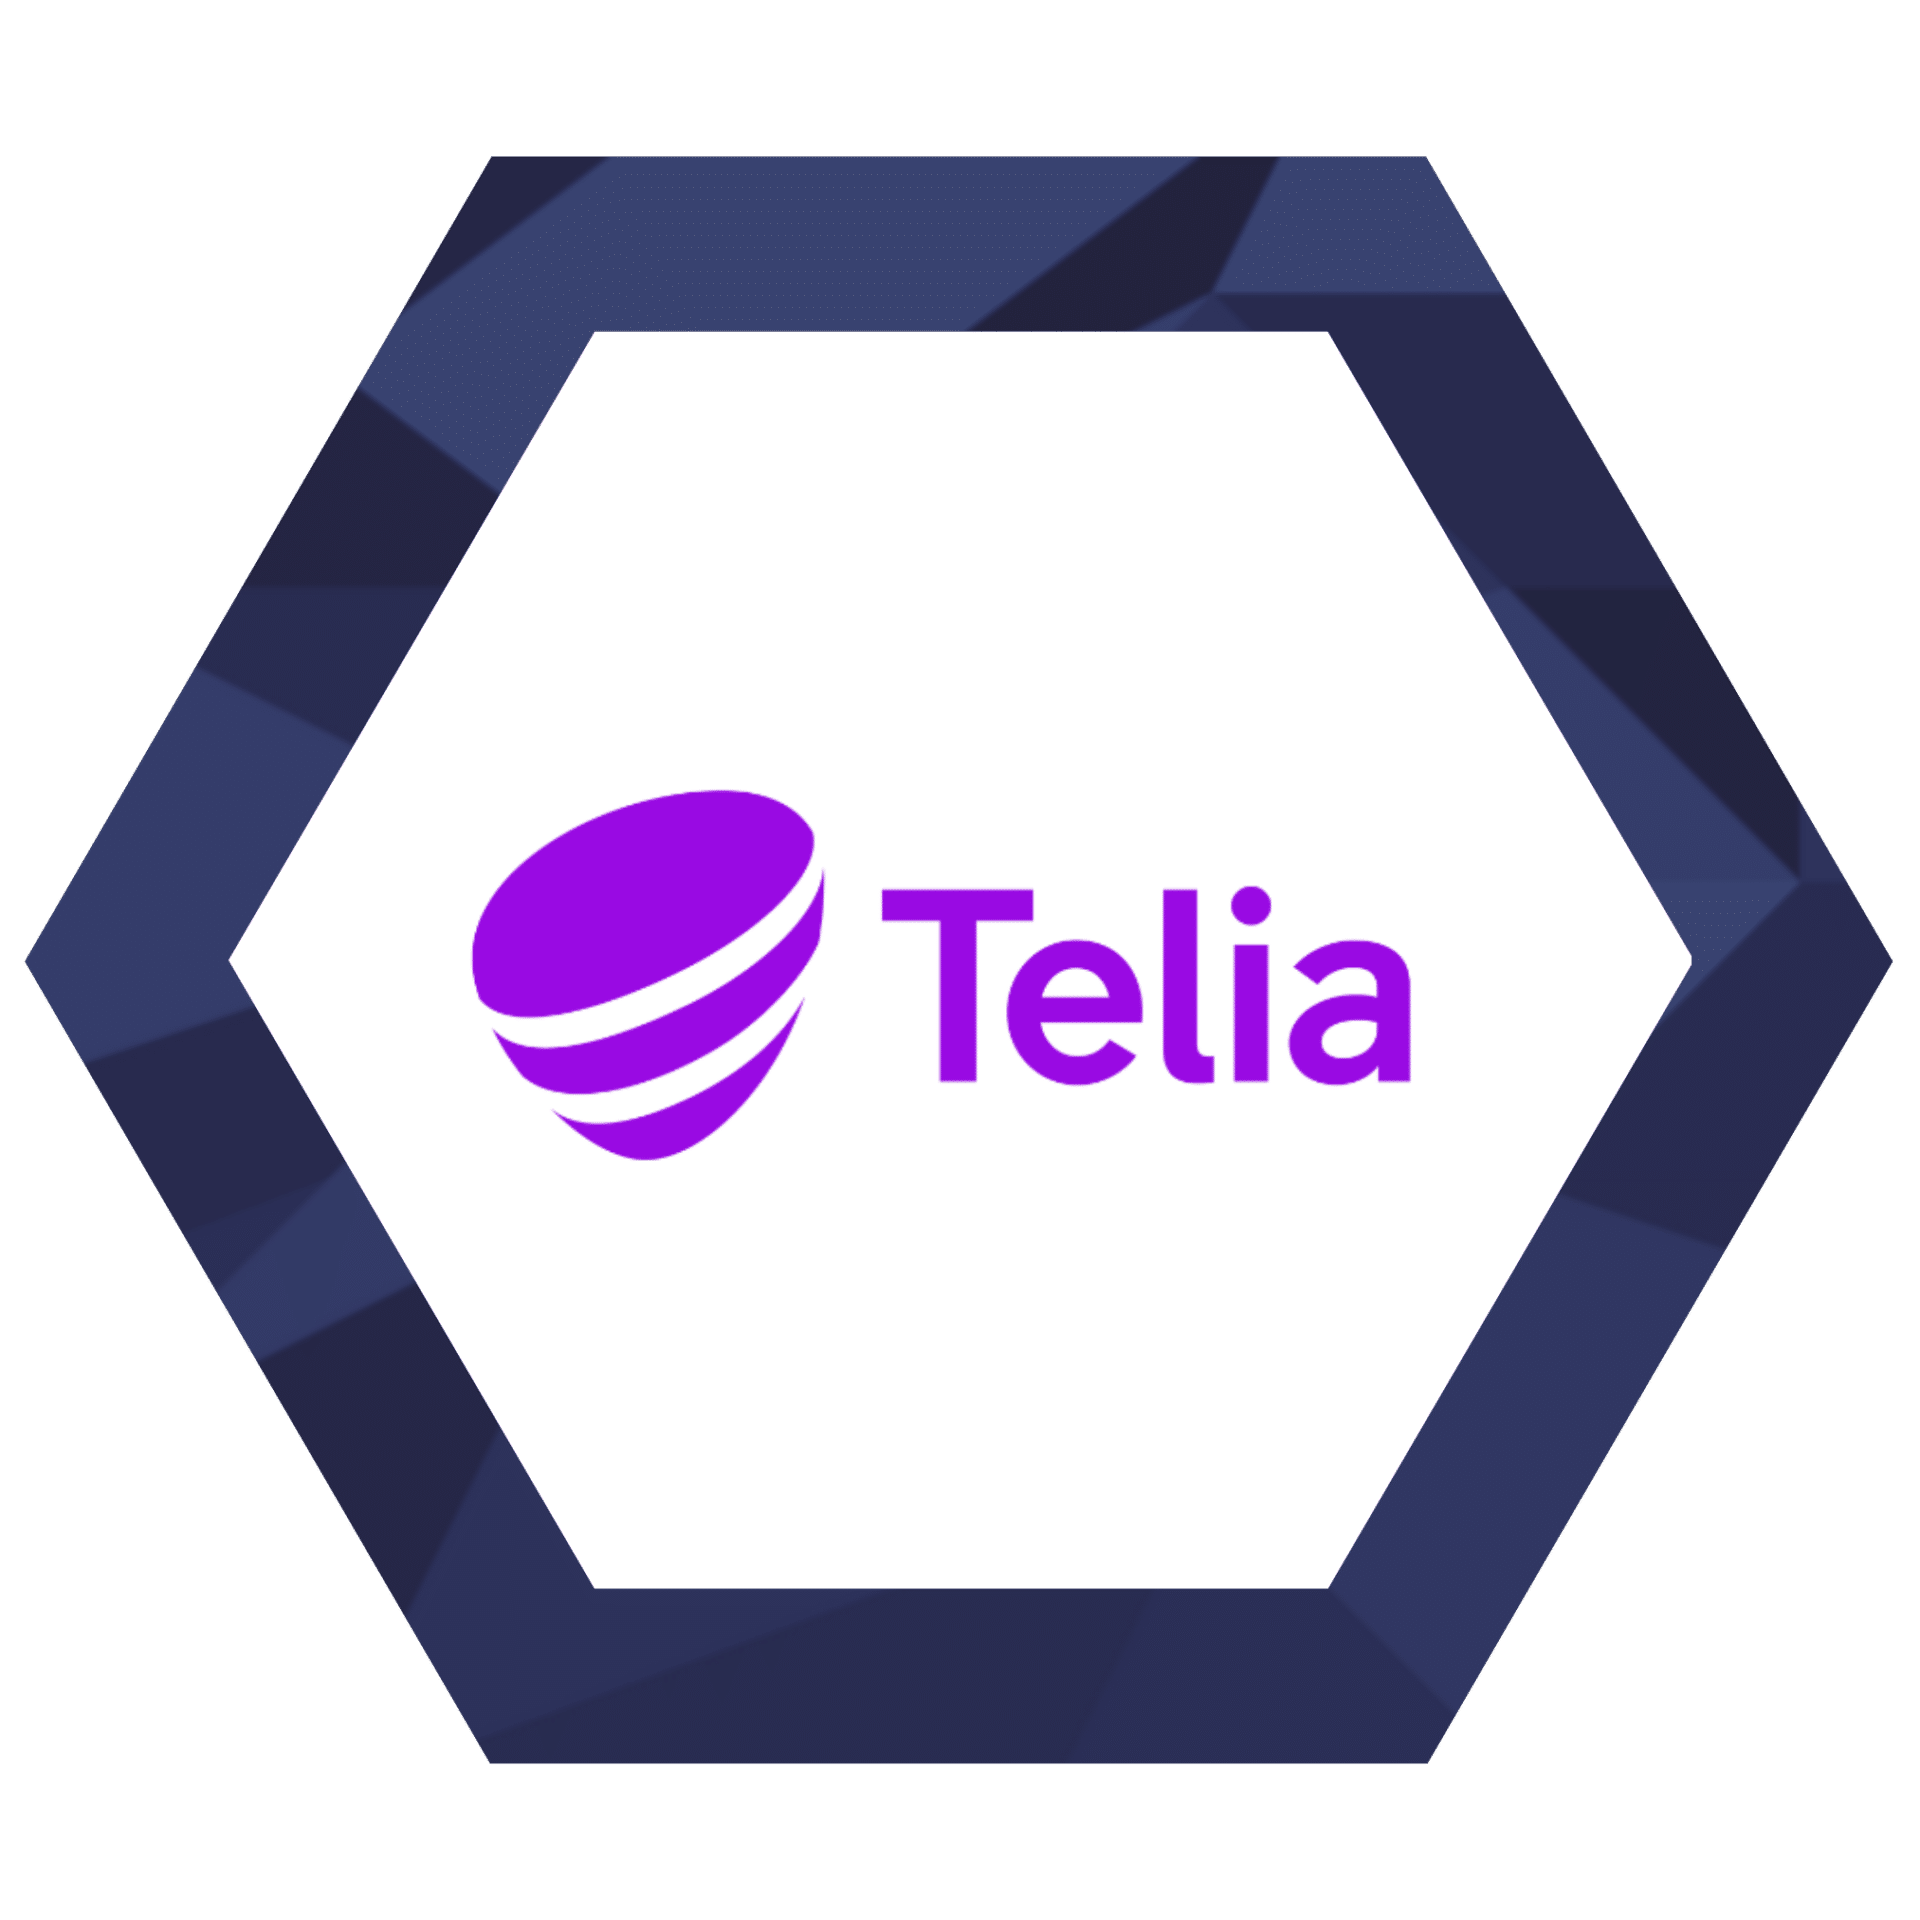 Picture of the Telia logo, one of the breakout sessions at AET